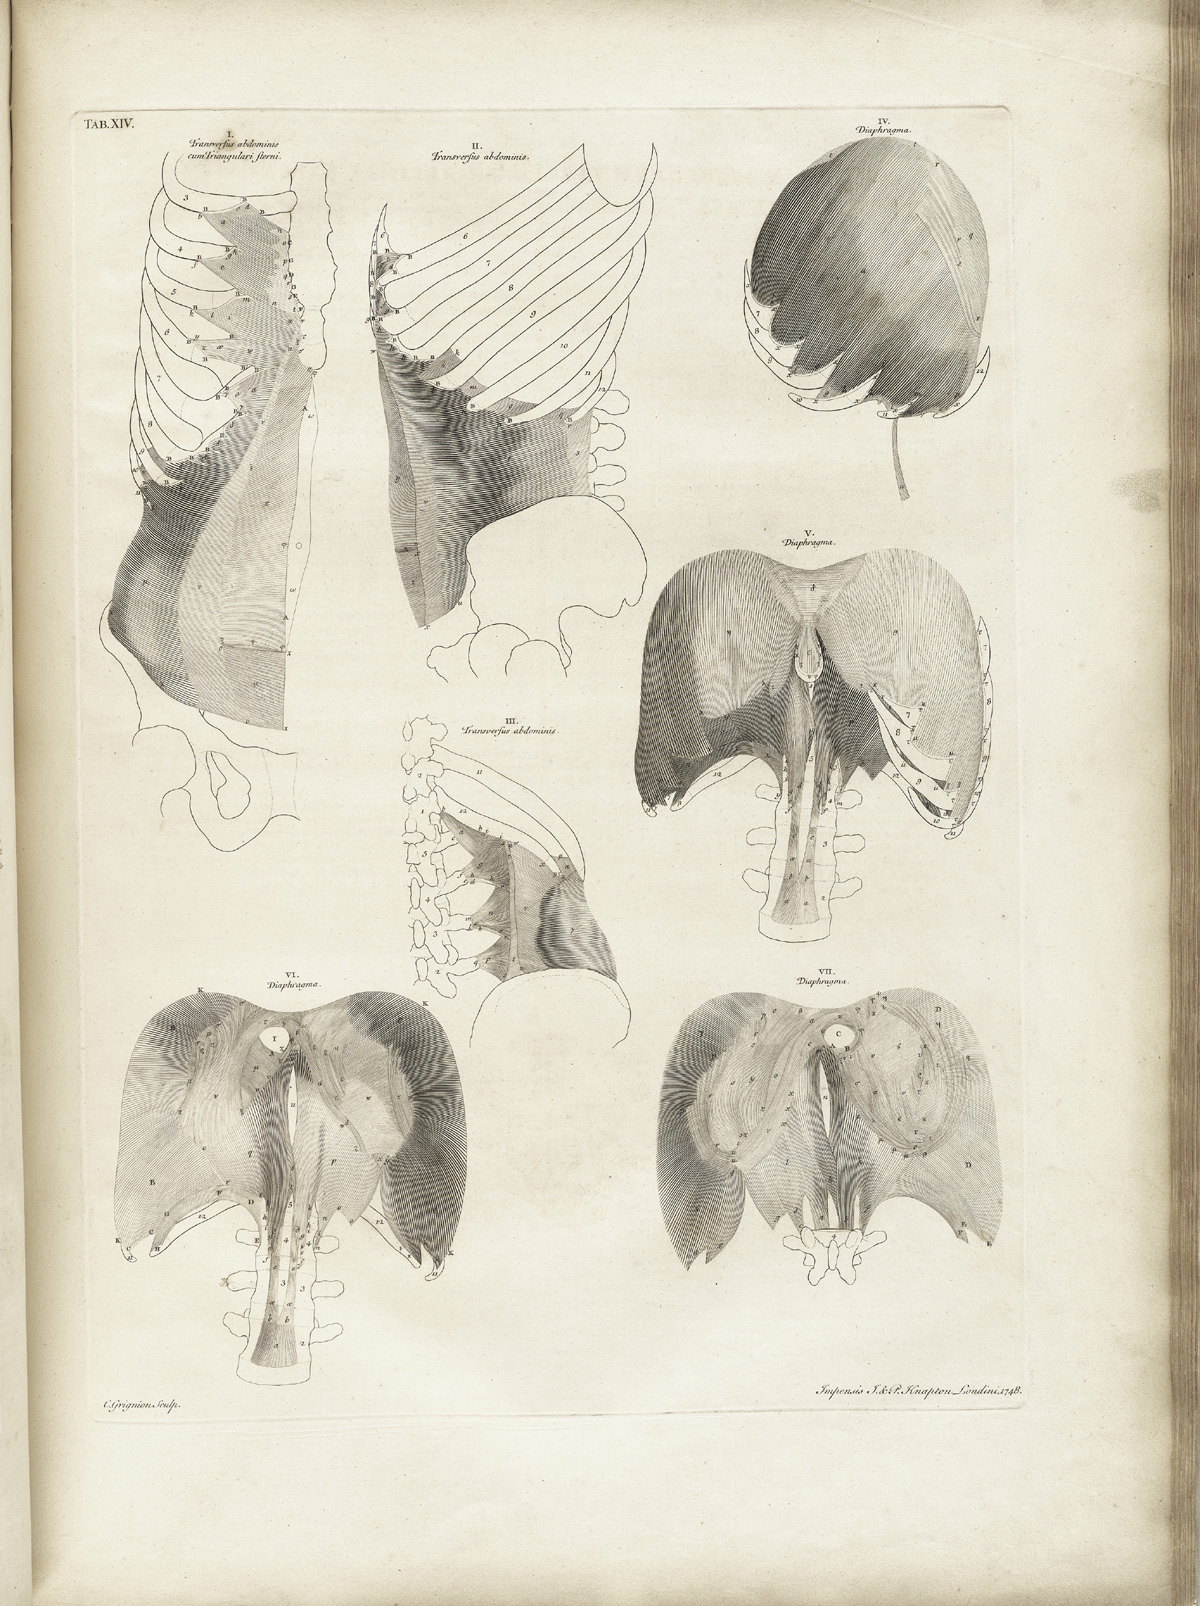 Table 14 of Bernhard Siegfried Albinus' Tabulae sceleti et musculorum corporis humani, featuring the front, side and back images of the the transversus abdominis and diaphram.